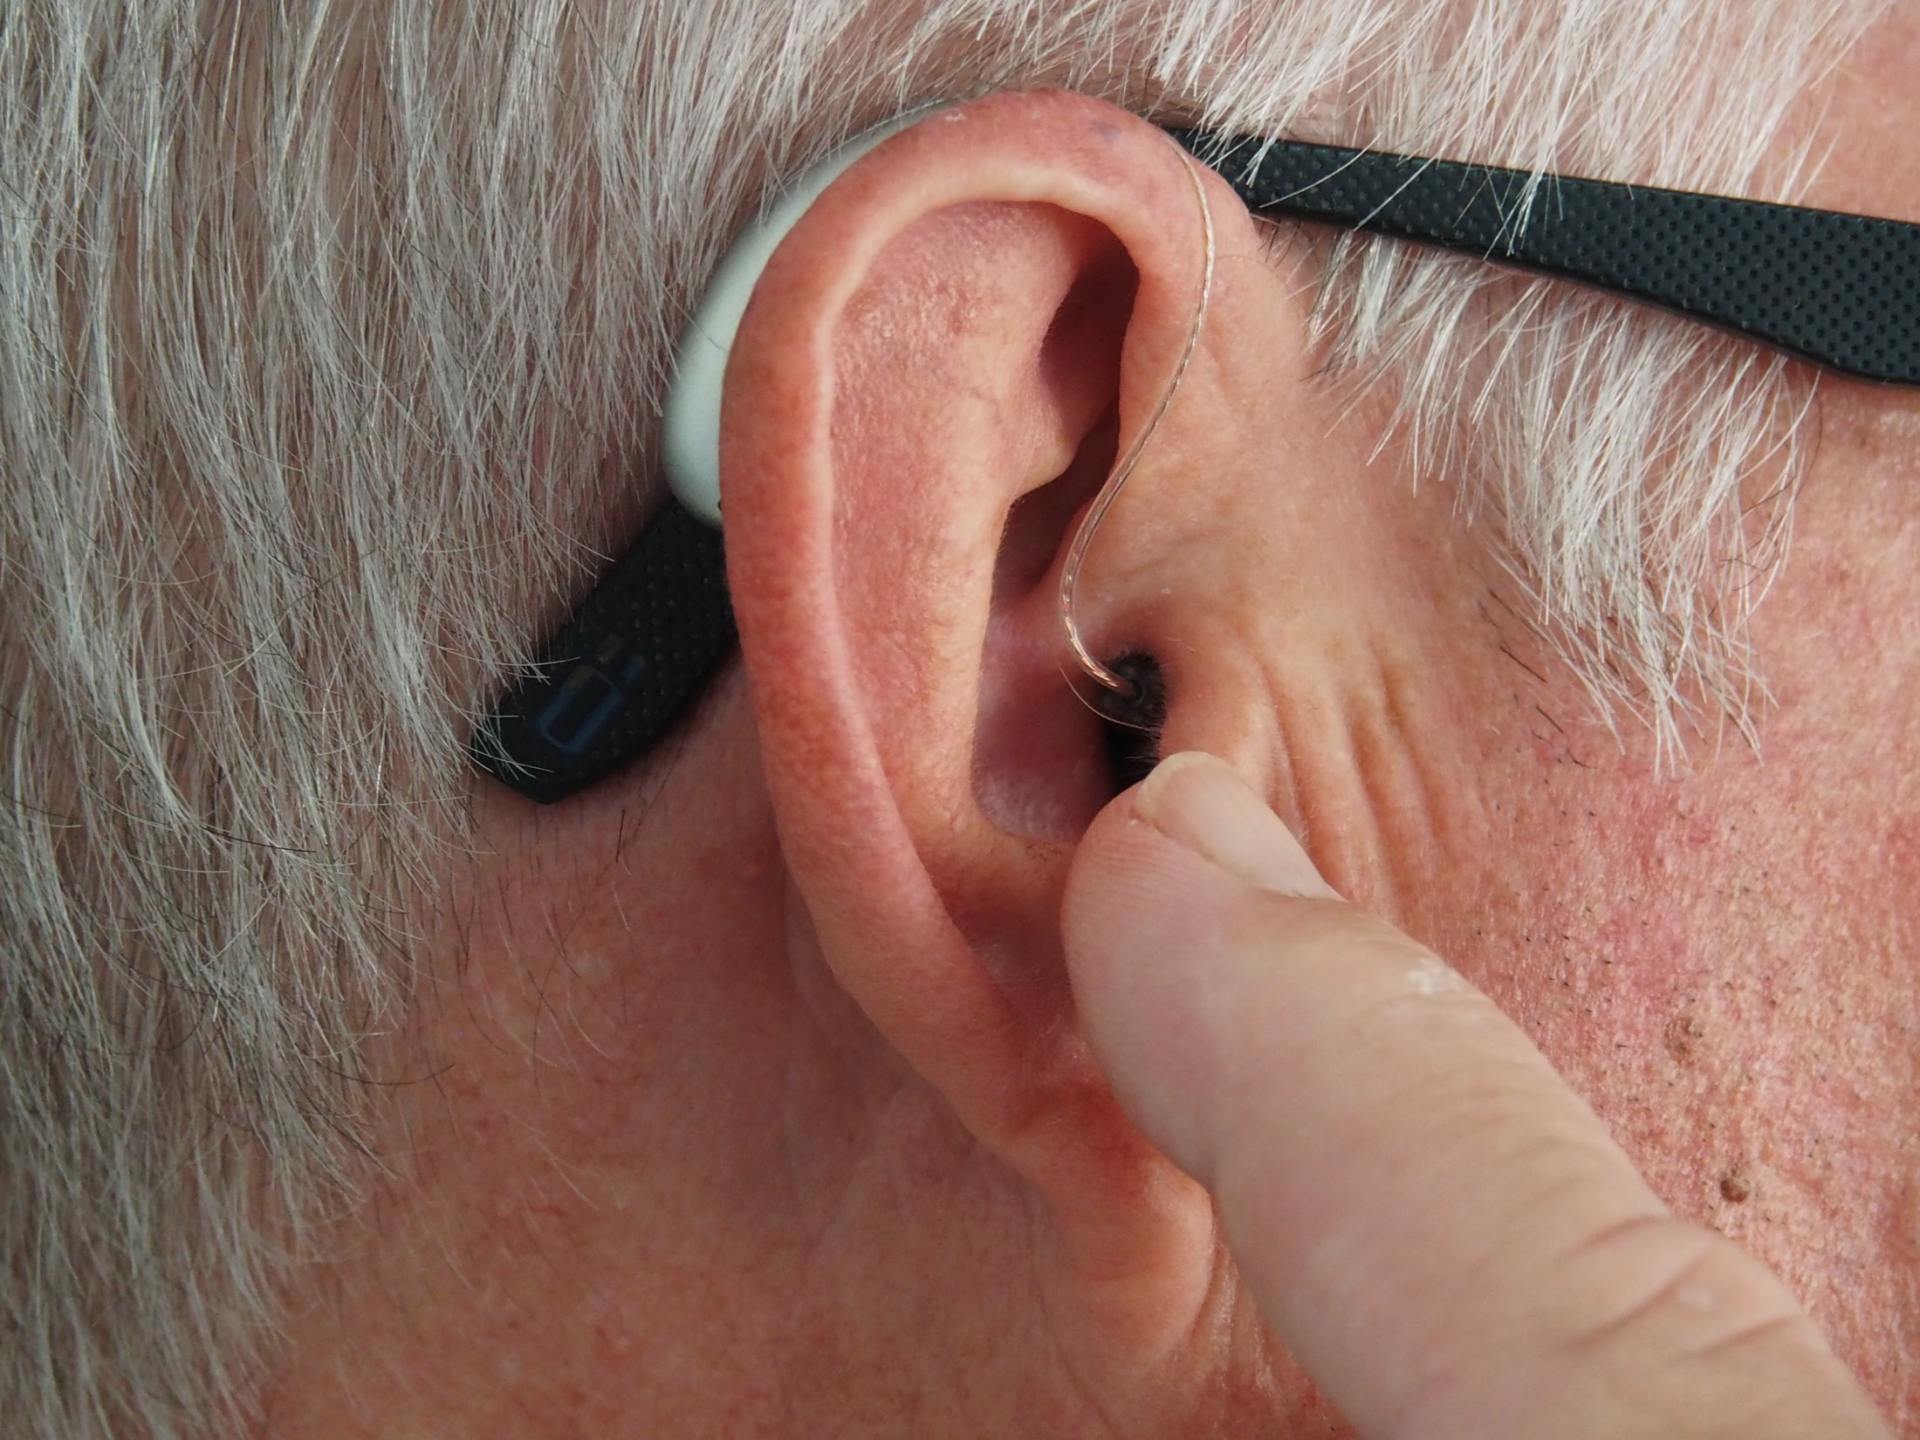 white-haired man with hearing aid in ear